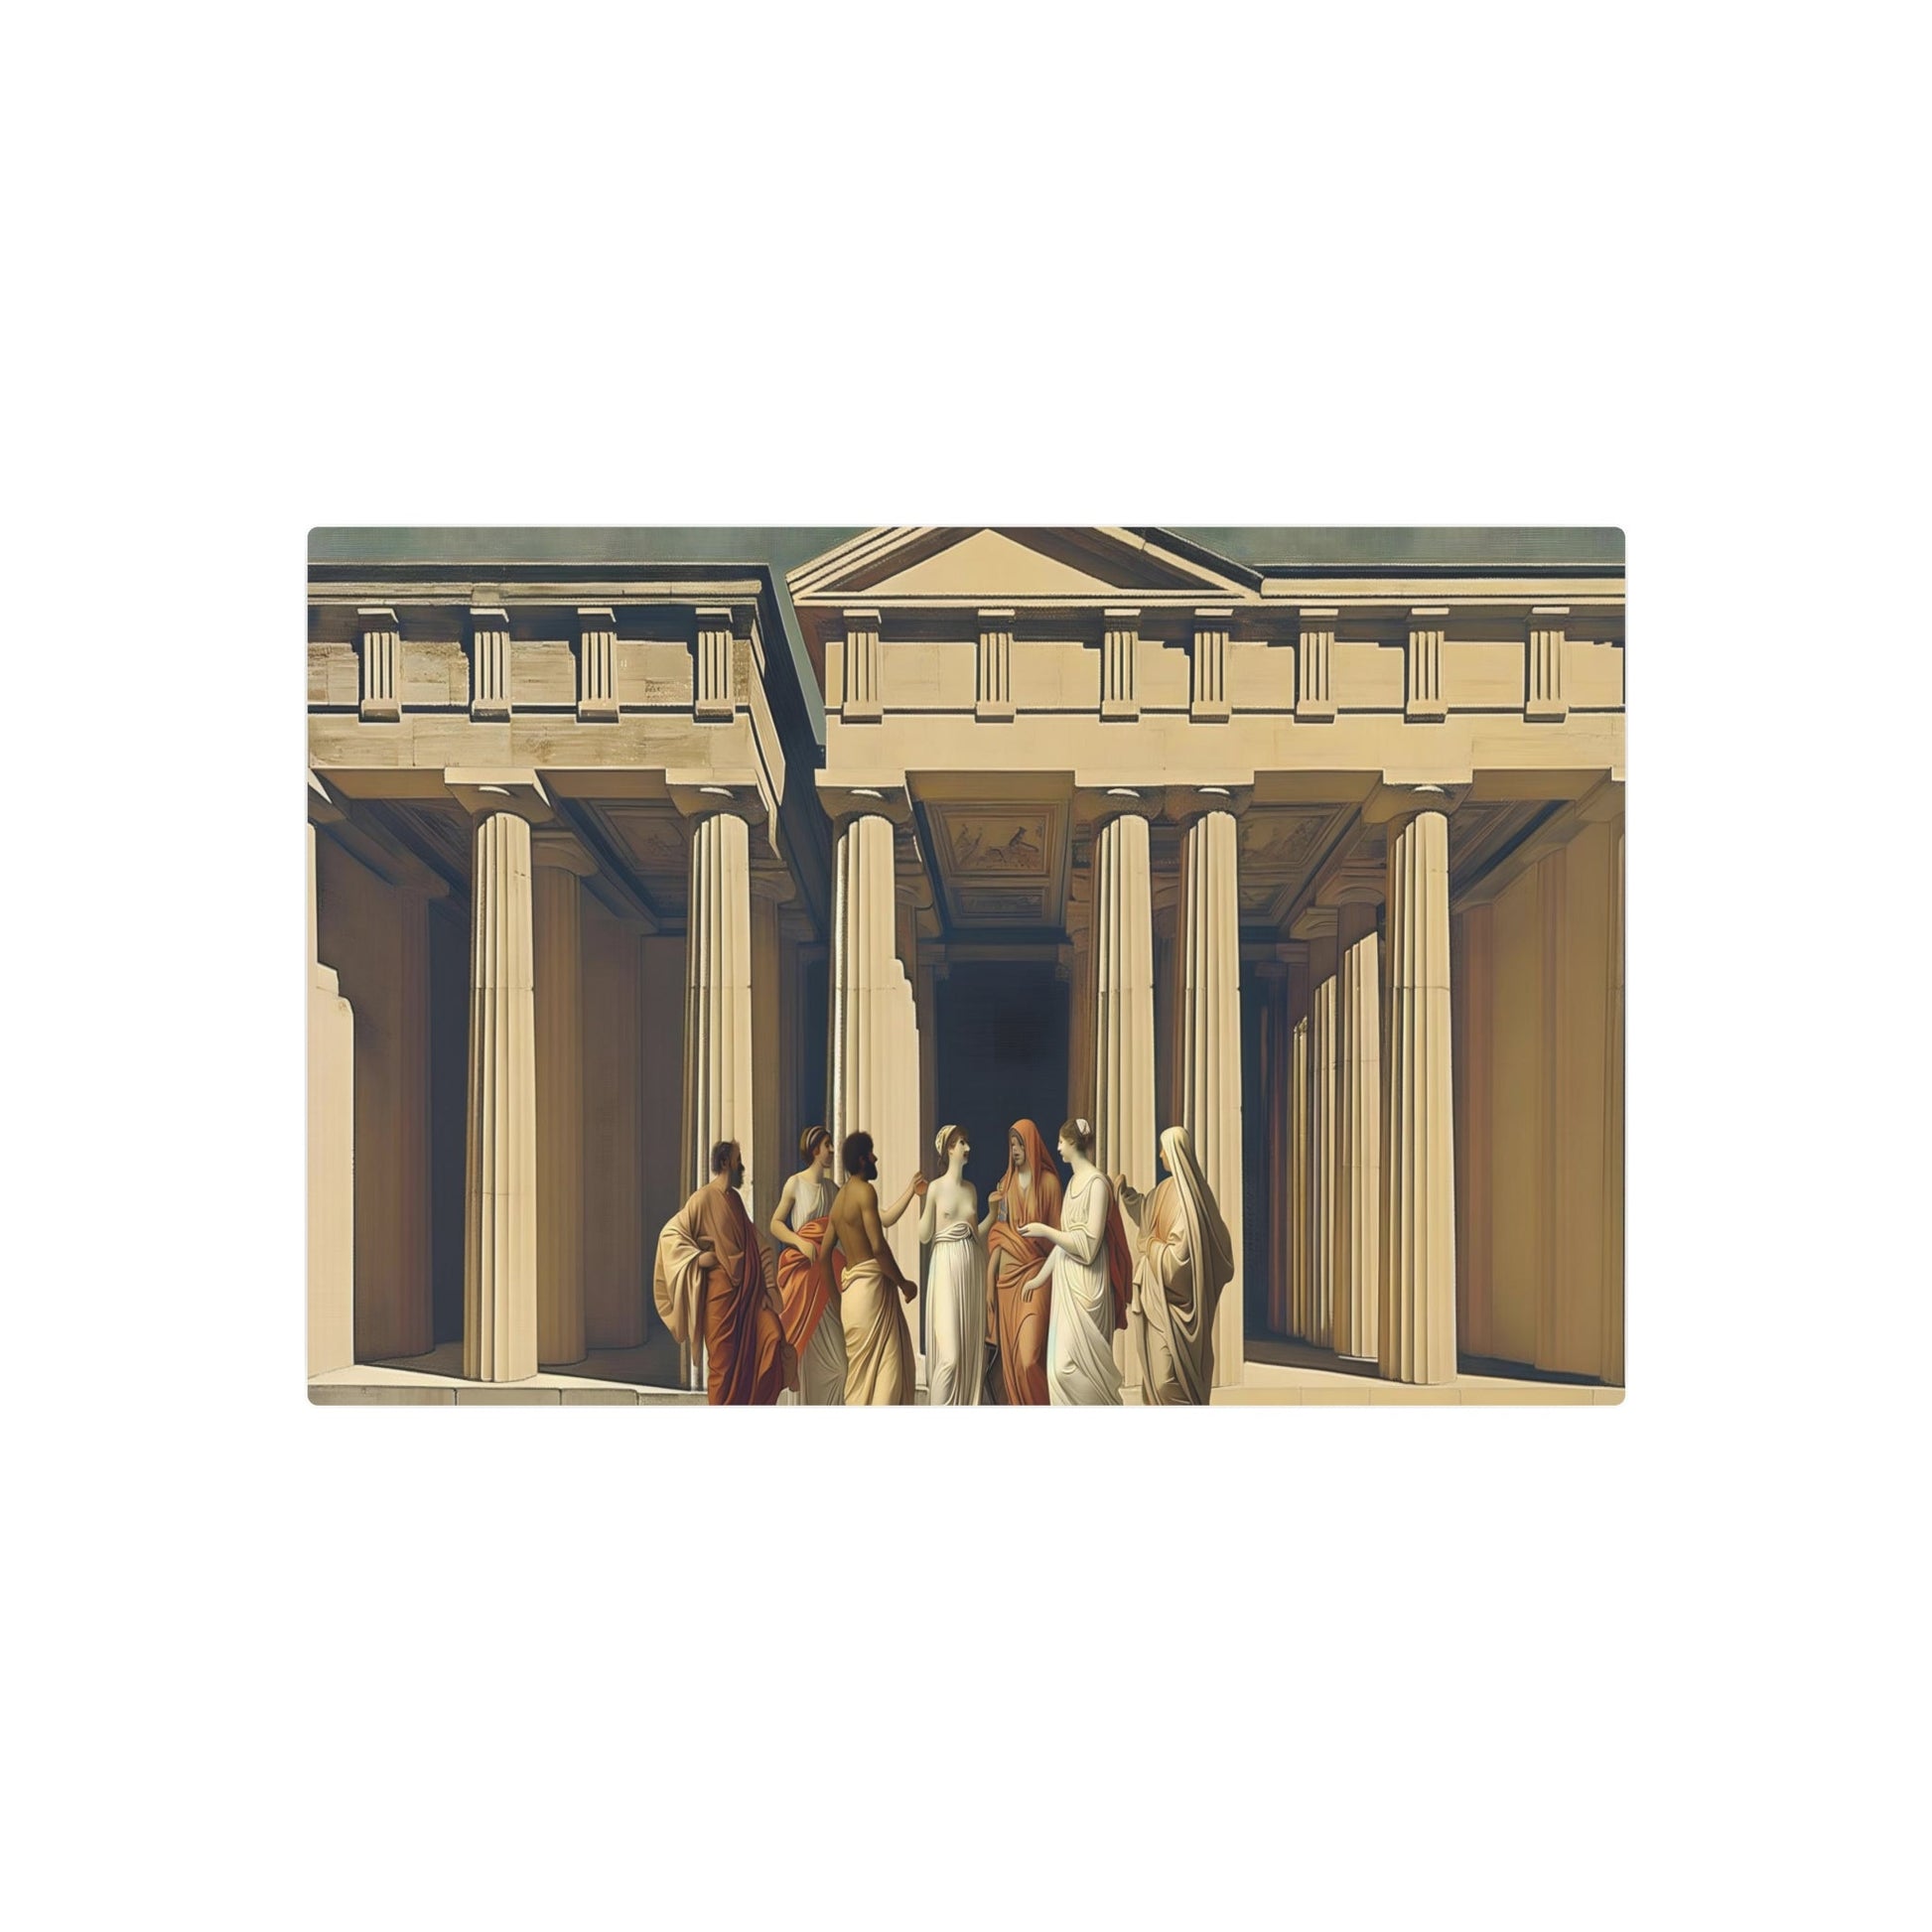 Metal Poster Art | "Neoclassical Artwork with Greco-Roman Architecture & Robed Figures in Earthy Tones - Western Art Styles Collection" - Metal Poster Art 30″ x 20″ (Horizontal) 0.12''